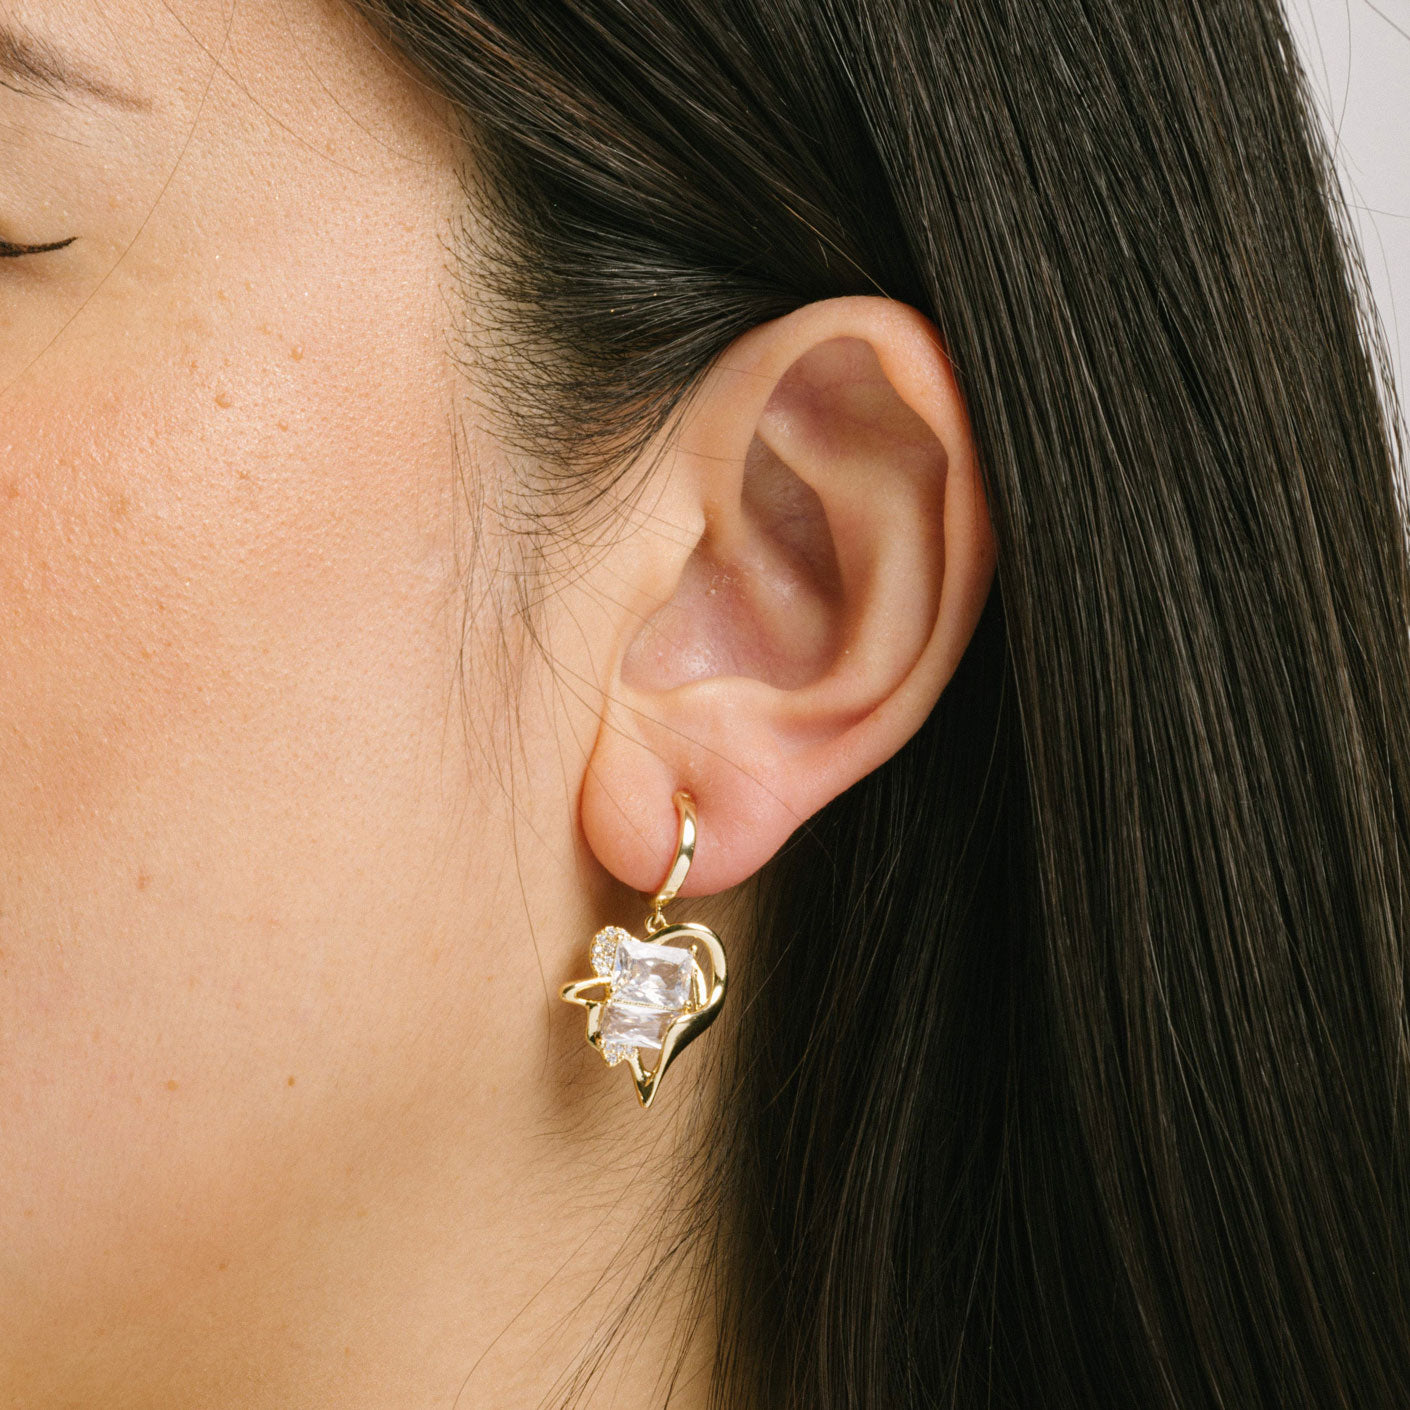 A model wearing the Amaretto Clip On Earrings feature a Mosquito Coil Clip-On closure type, making them ideal for all ear types, from Thick/Large Ears to Sensitive ones and Small/Thin Ears to Stretched/Healing Ears. Average wear duration can be up to 24 hours with a medium secure hold, and they can be gently adjusted by squeezing the padding forward once on the ear. The materials used in their construction areCubic Zirconia and Copper. Please note, item is only one pair.